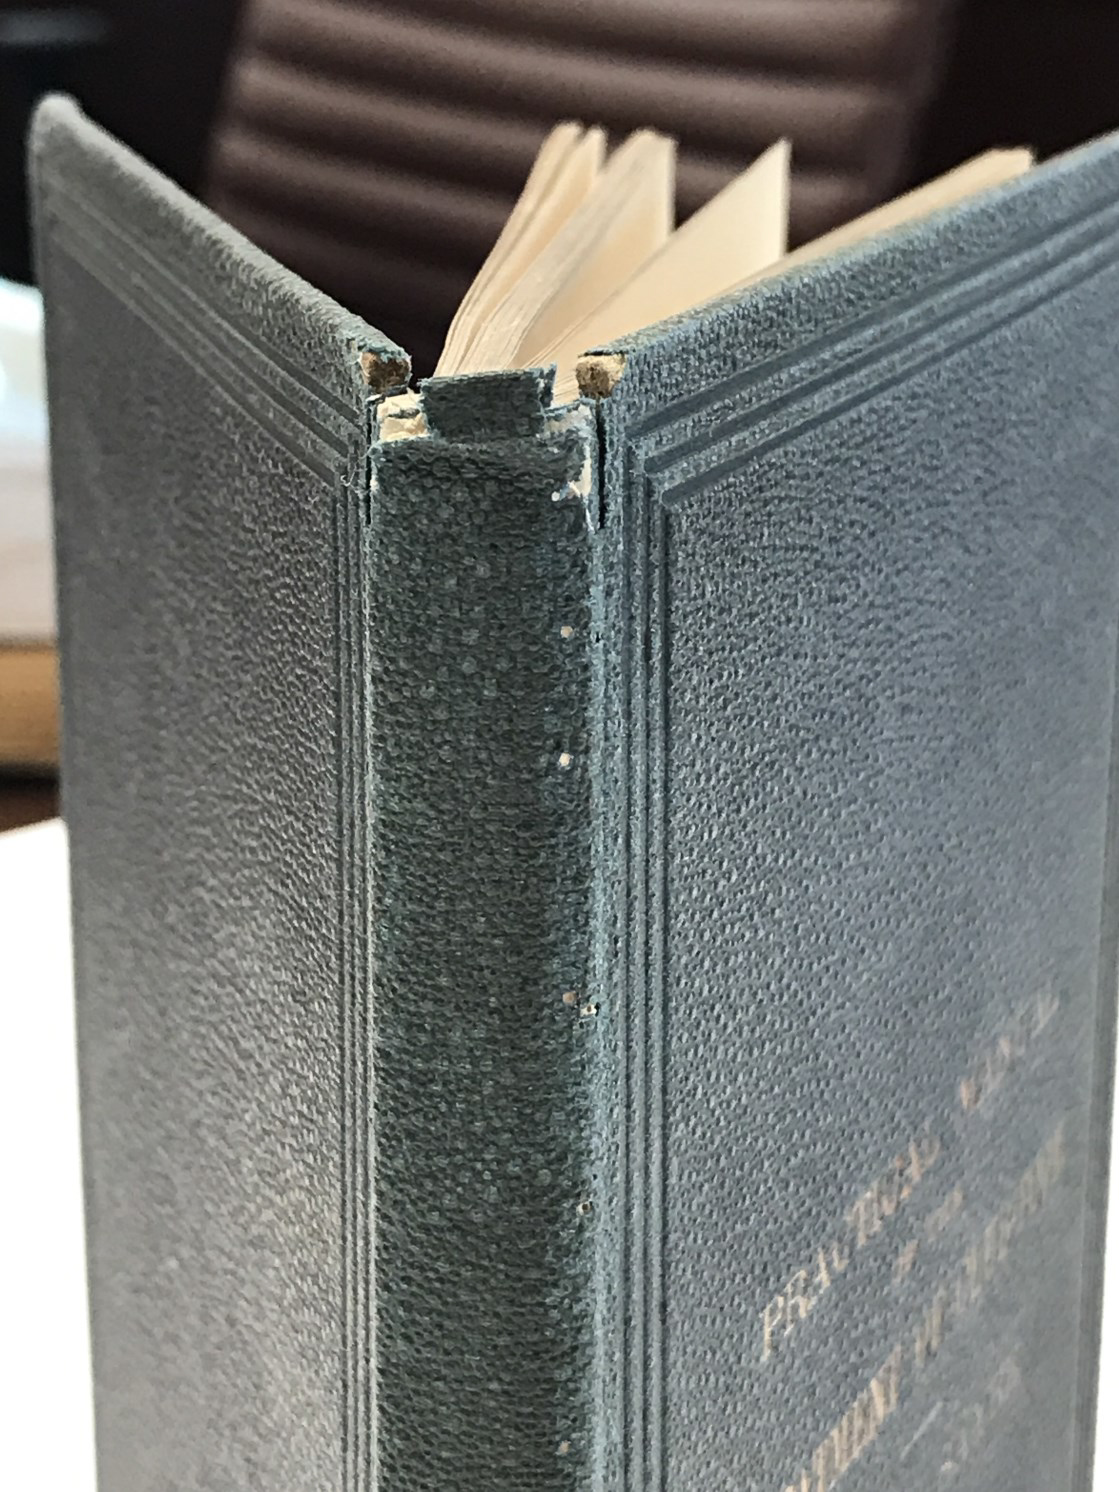 repair needed to book's spine